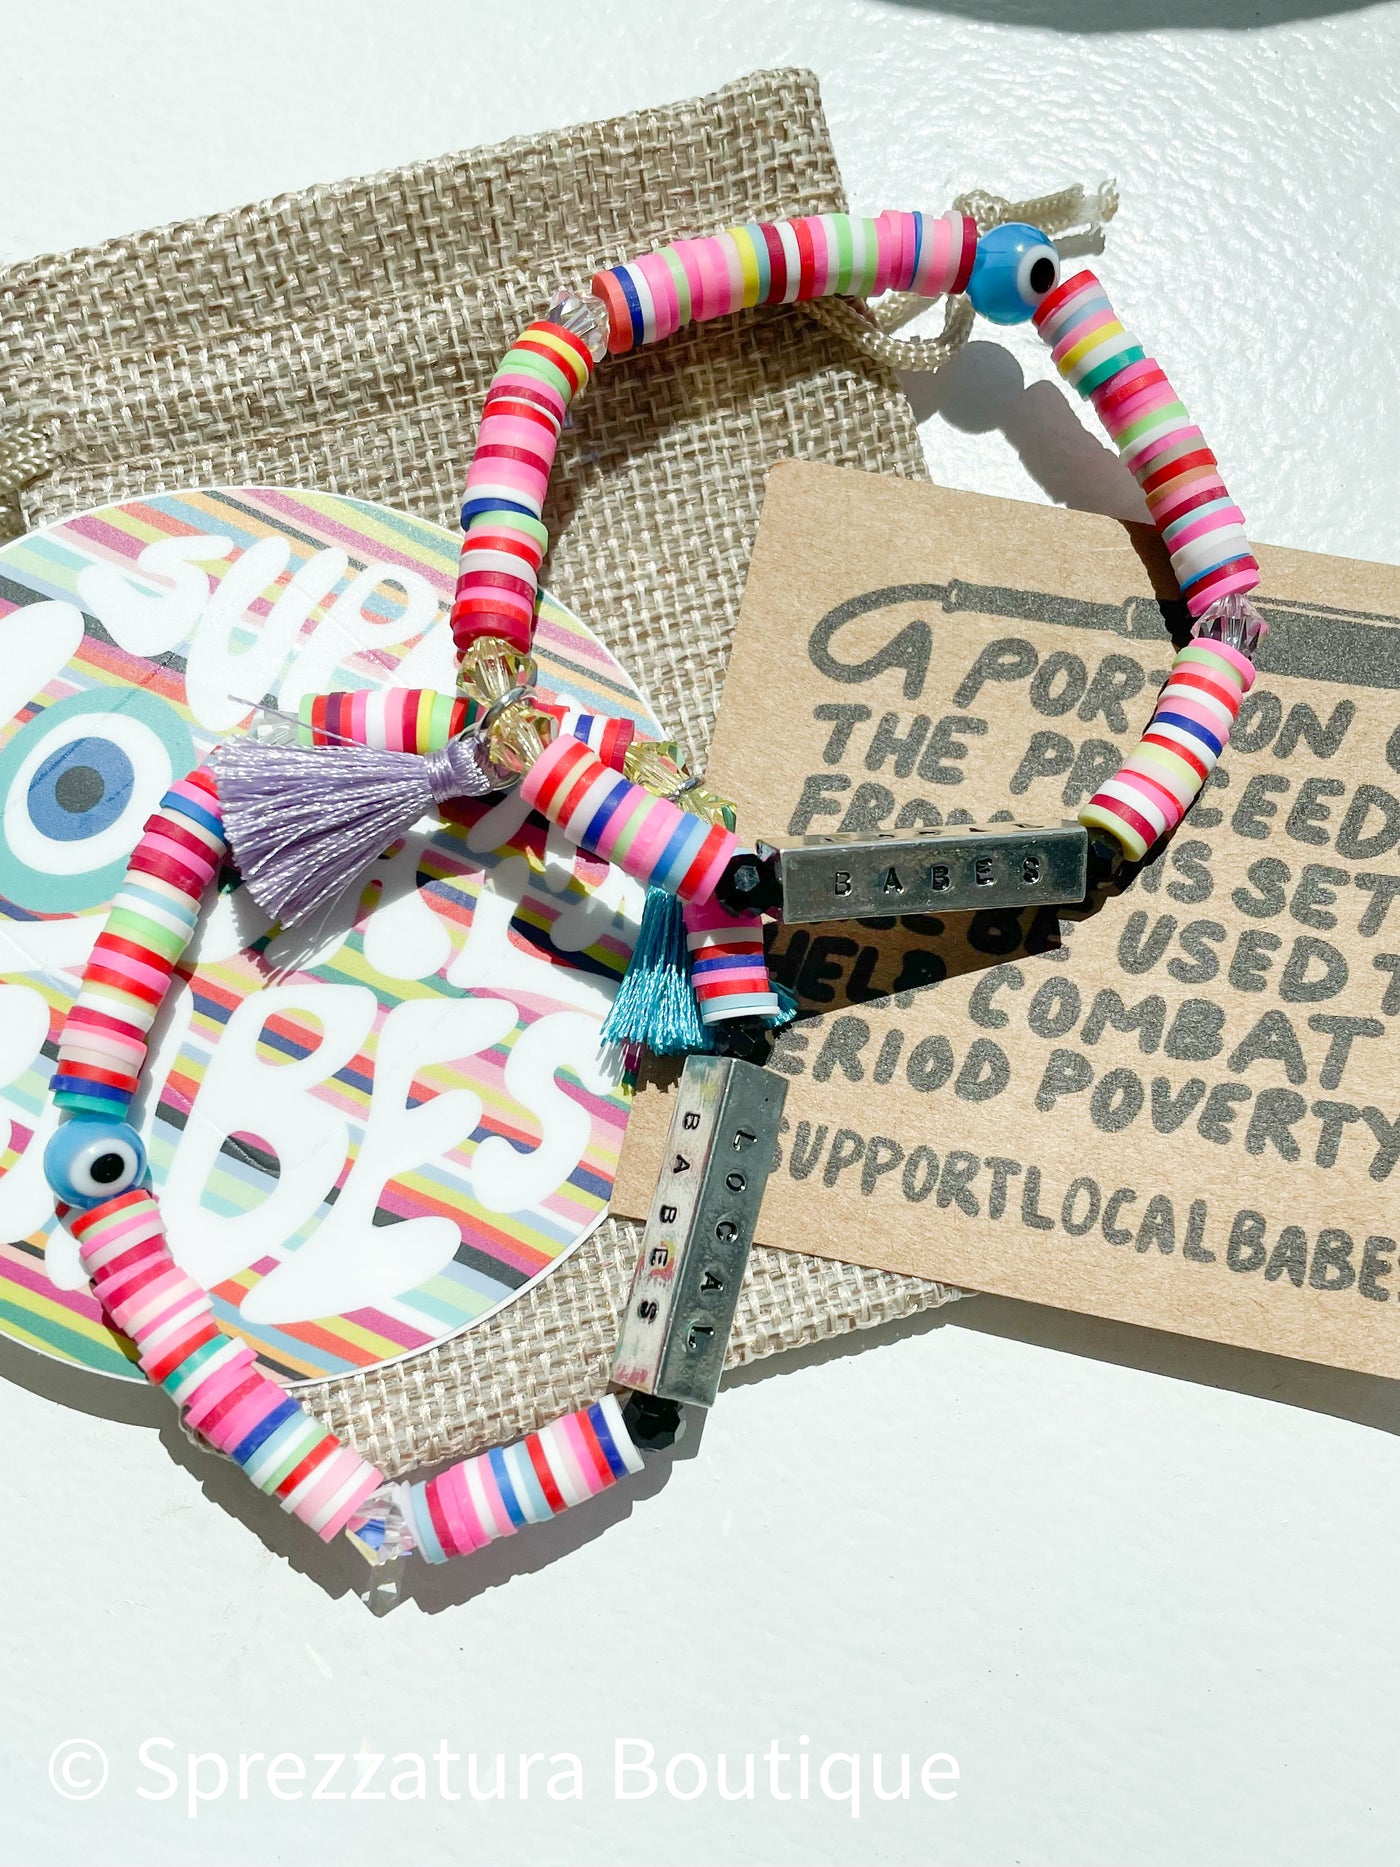 Colorful heishe beads evil eye bracelet handmade locally made support local babes tassel. period poverty donation support woman made